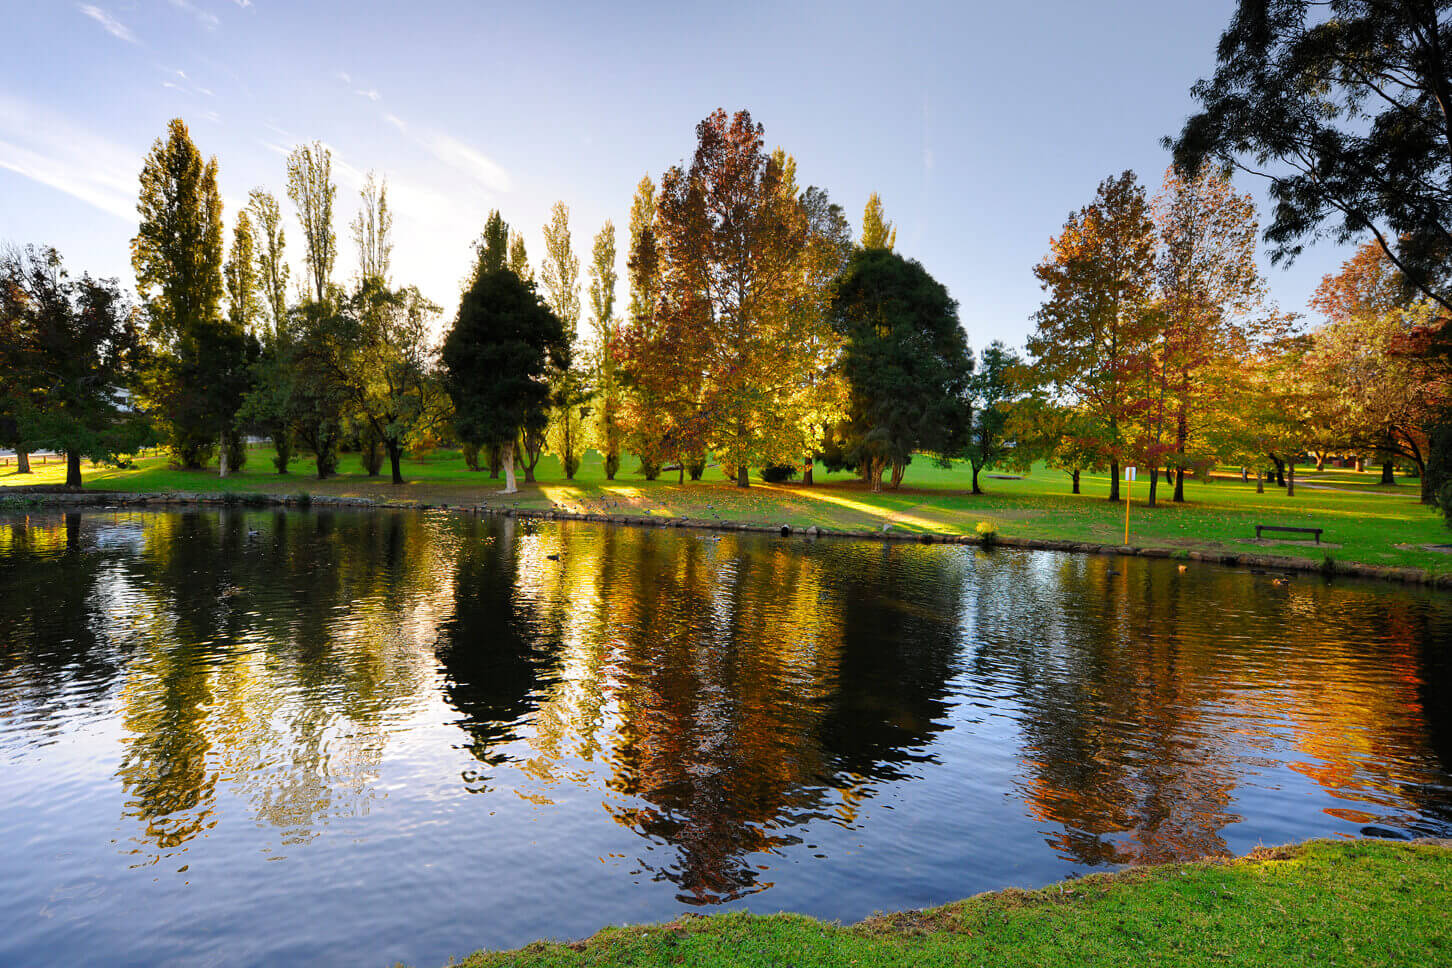 View of Stirk Park and the lake during Autumn